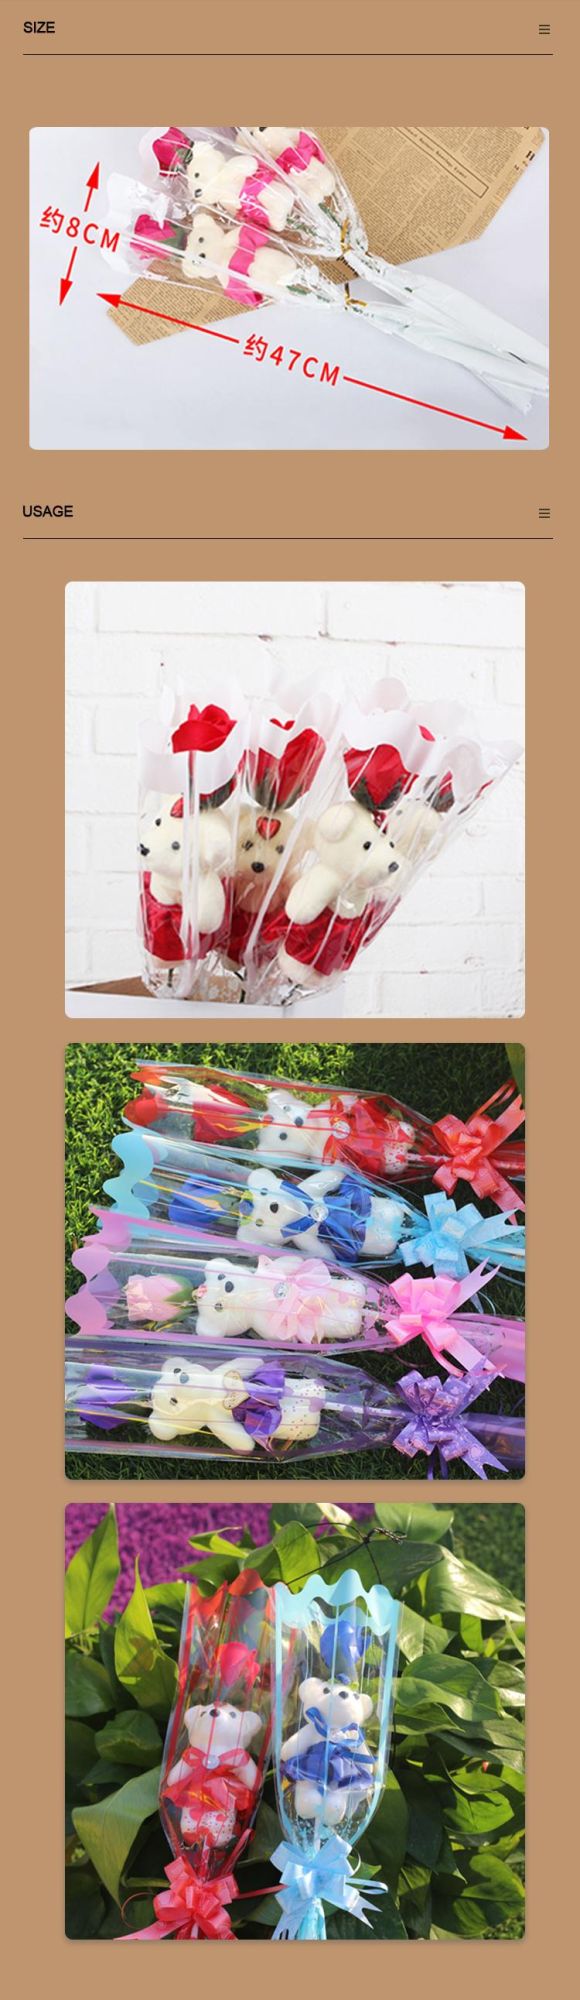 Hotsale Soap Roses Gift Teddy Bear for Christmas, Valentine′s Day, Mother′s Day Gifts